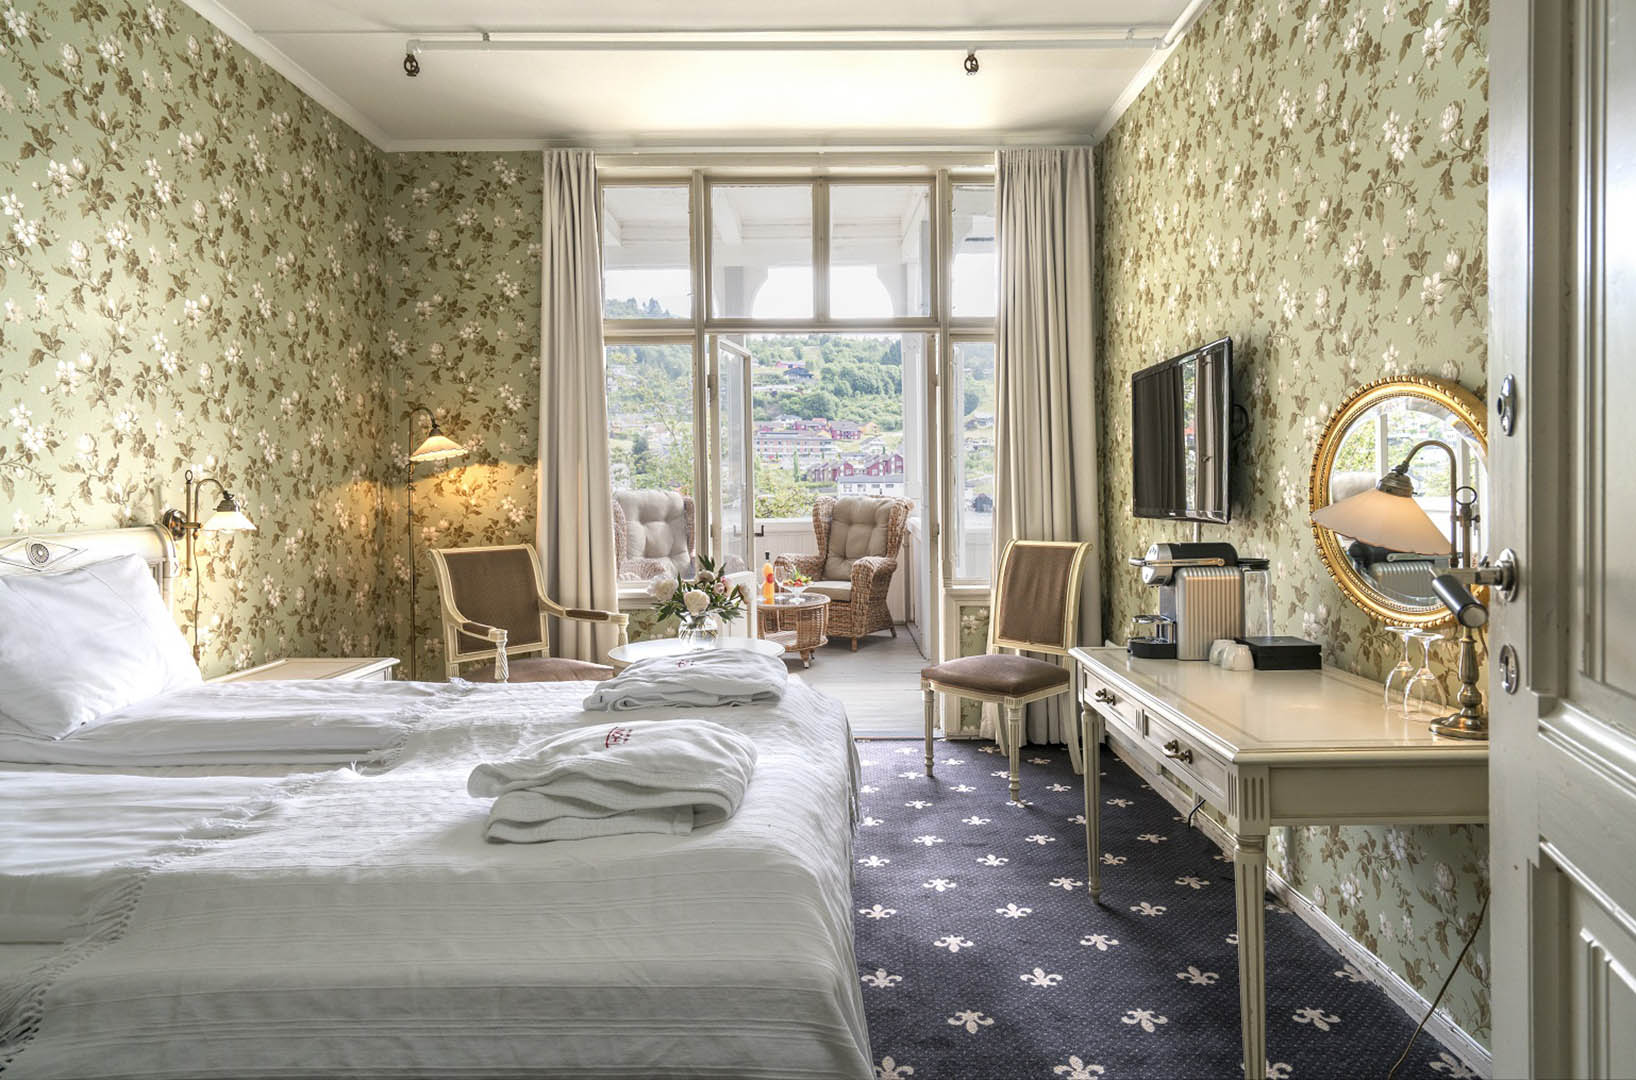 Thon Hotel Sandven: Welcome to a charming hotel overlooking the idyllic Hardangerfjord